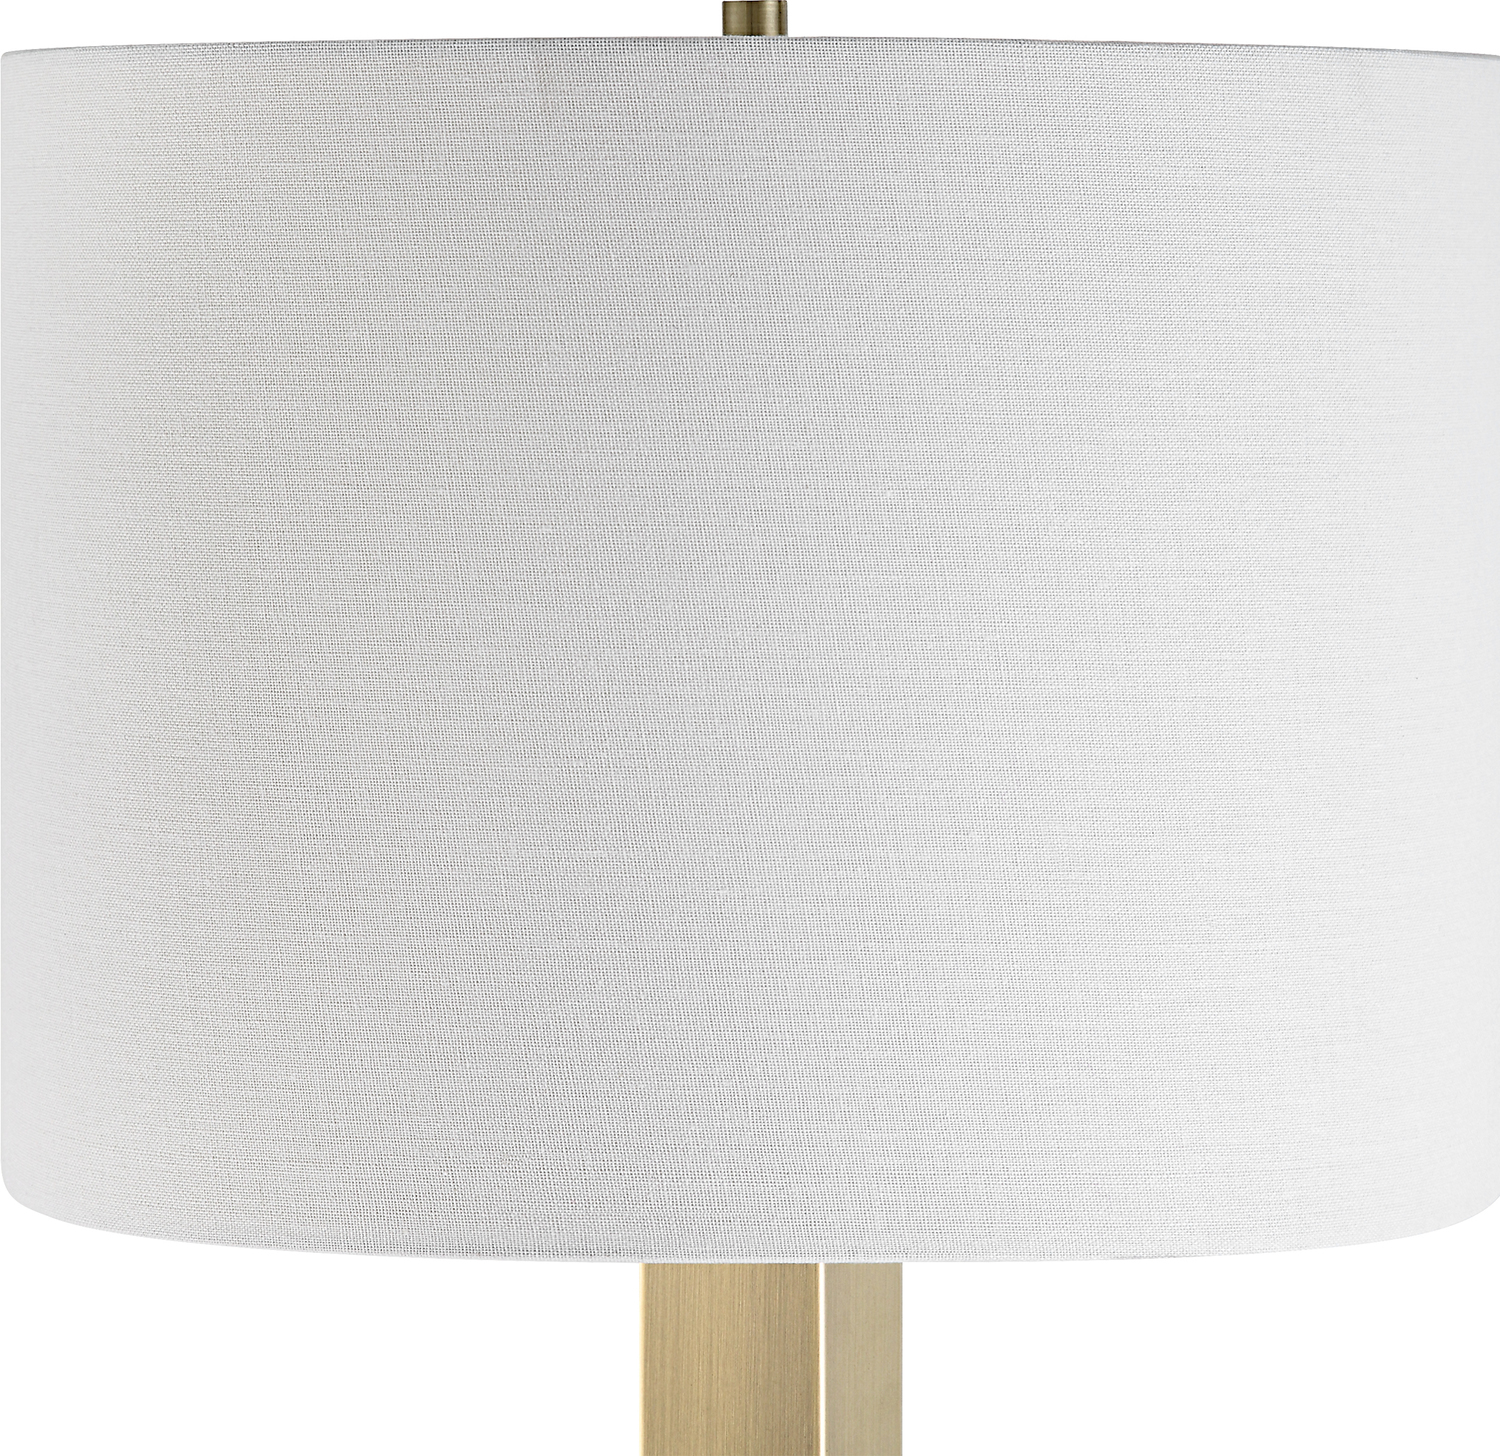 large outdoor lights for house Uttermost Brass Table Lamp This Sophisticated Table Lamp Showcases A Streamlined Metal Column Base Finished In Antique Brass.